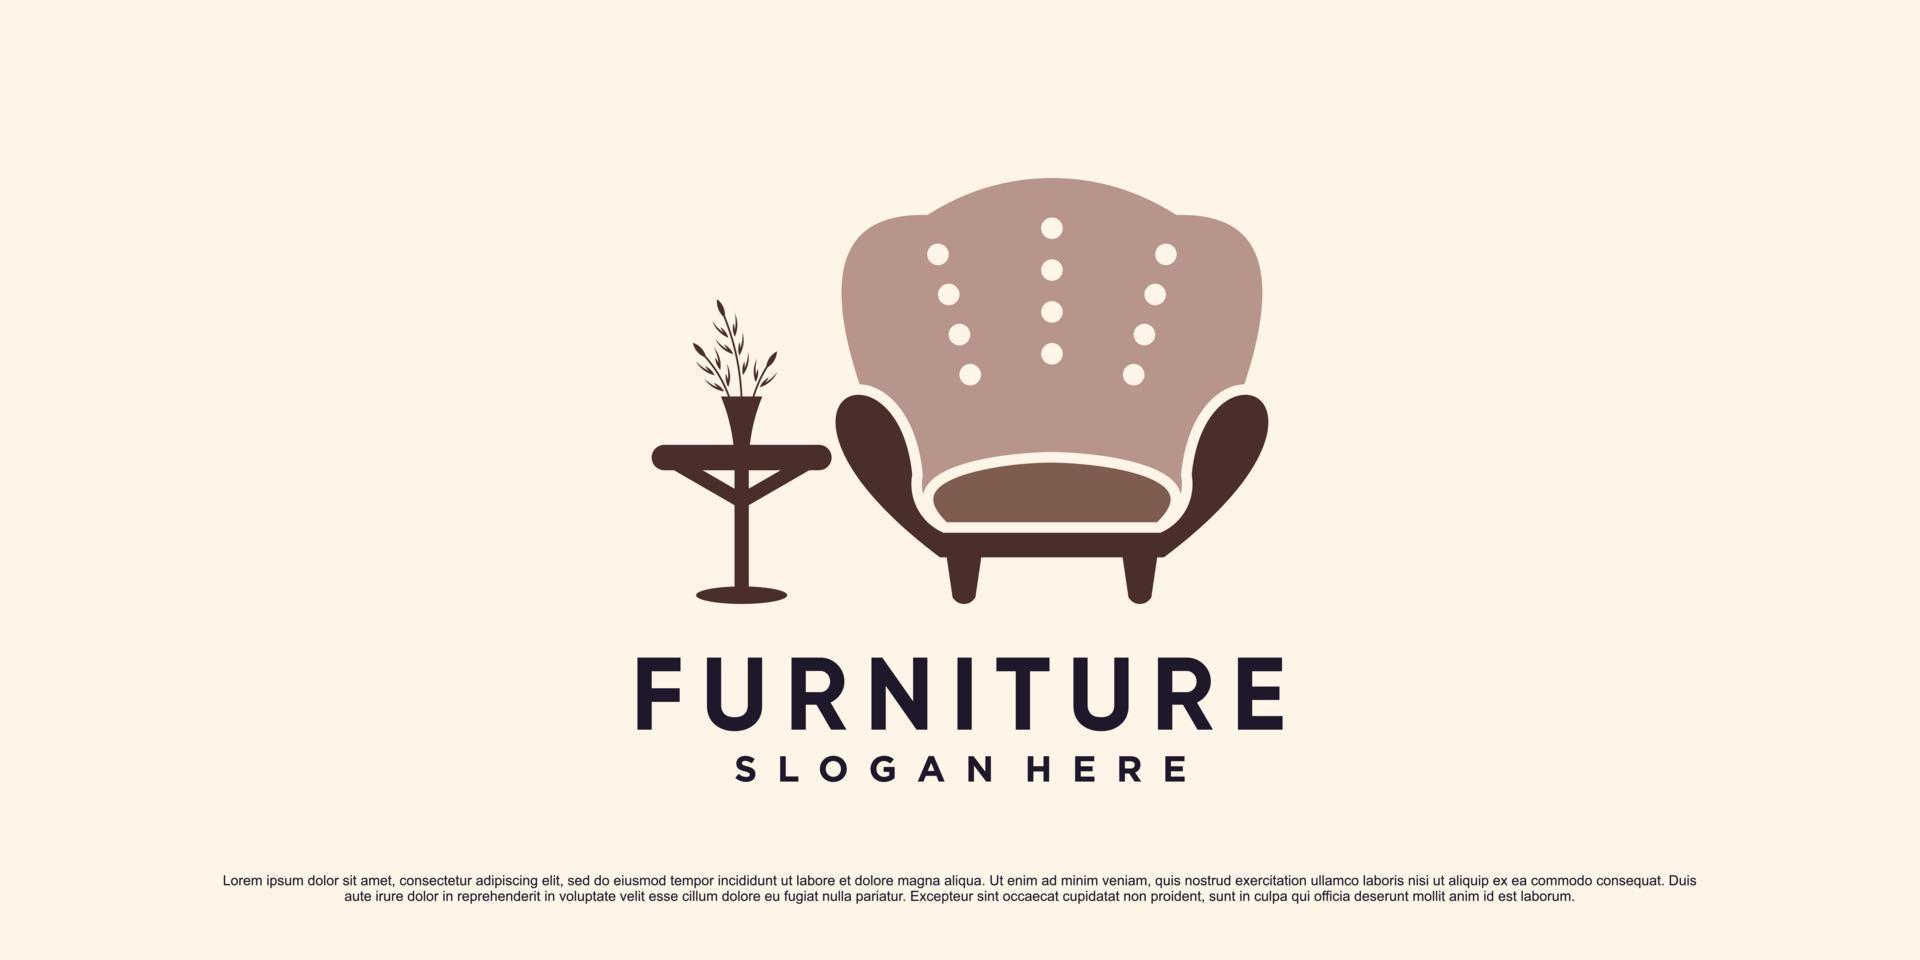 Furniture logo design template for interior business with sofa icon and creative concept vector